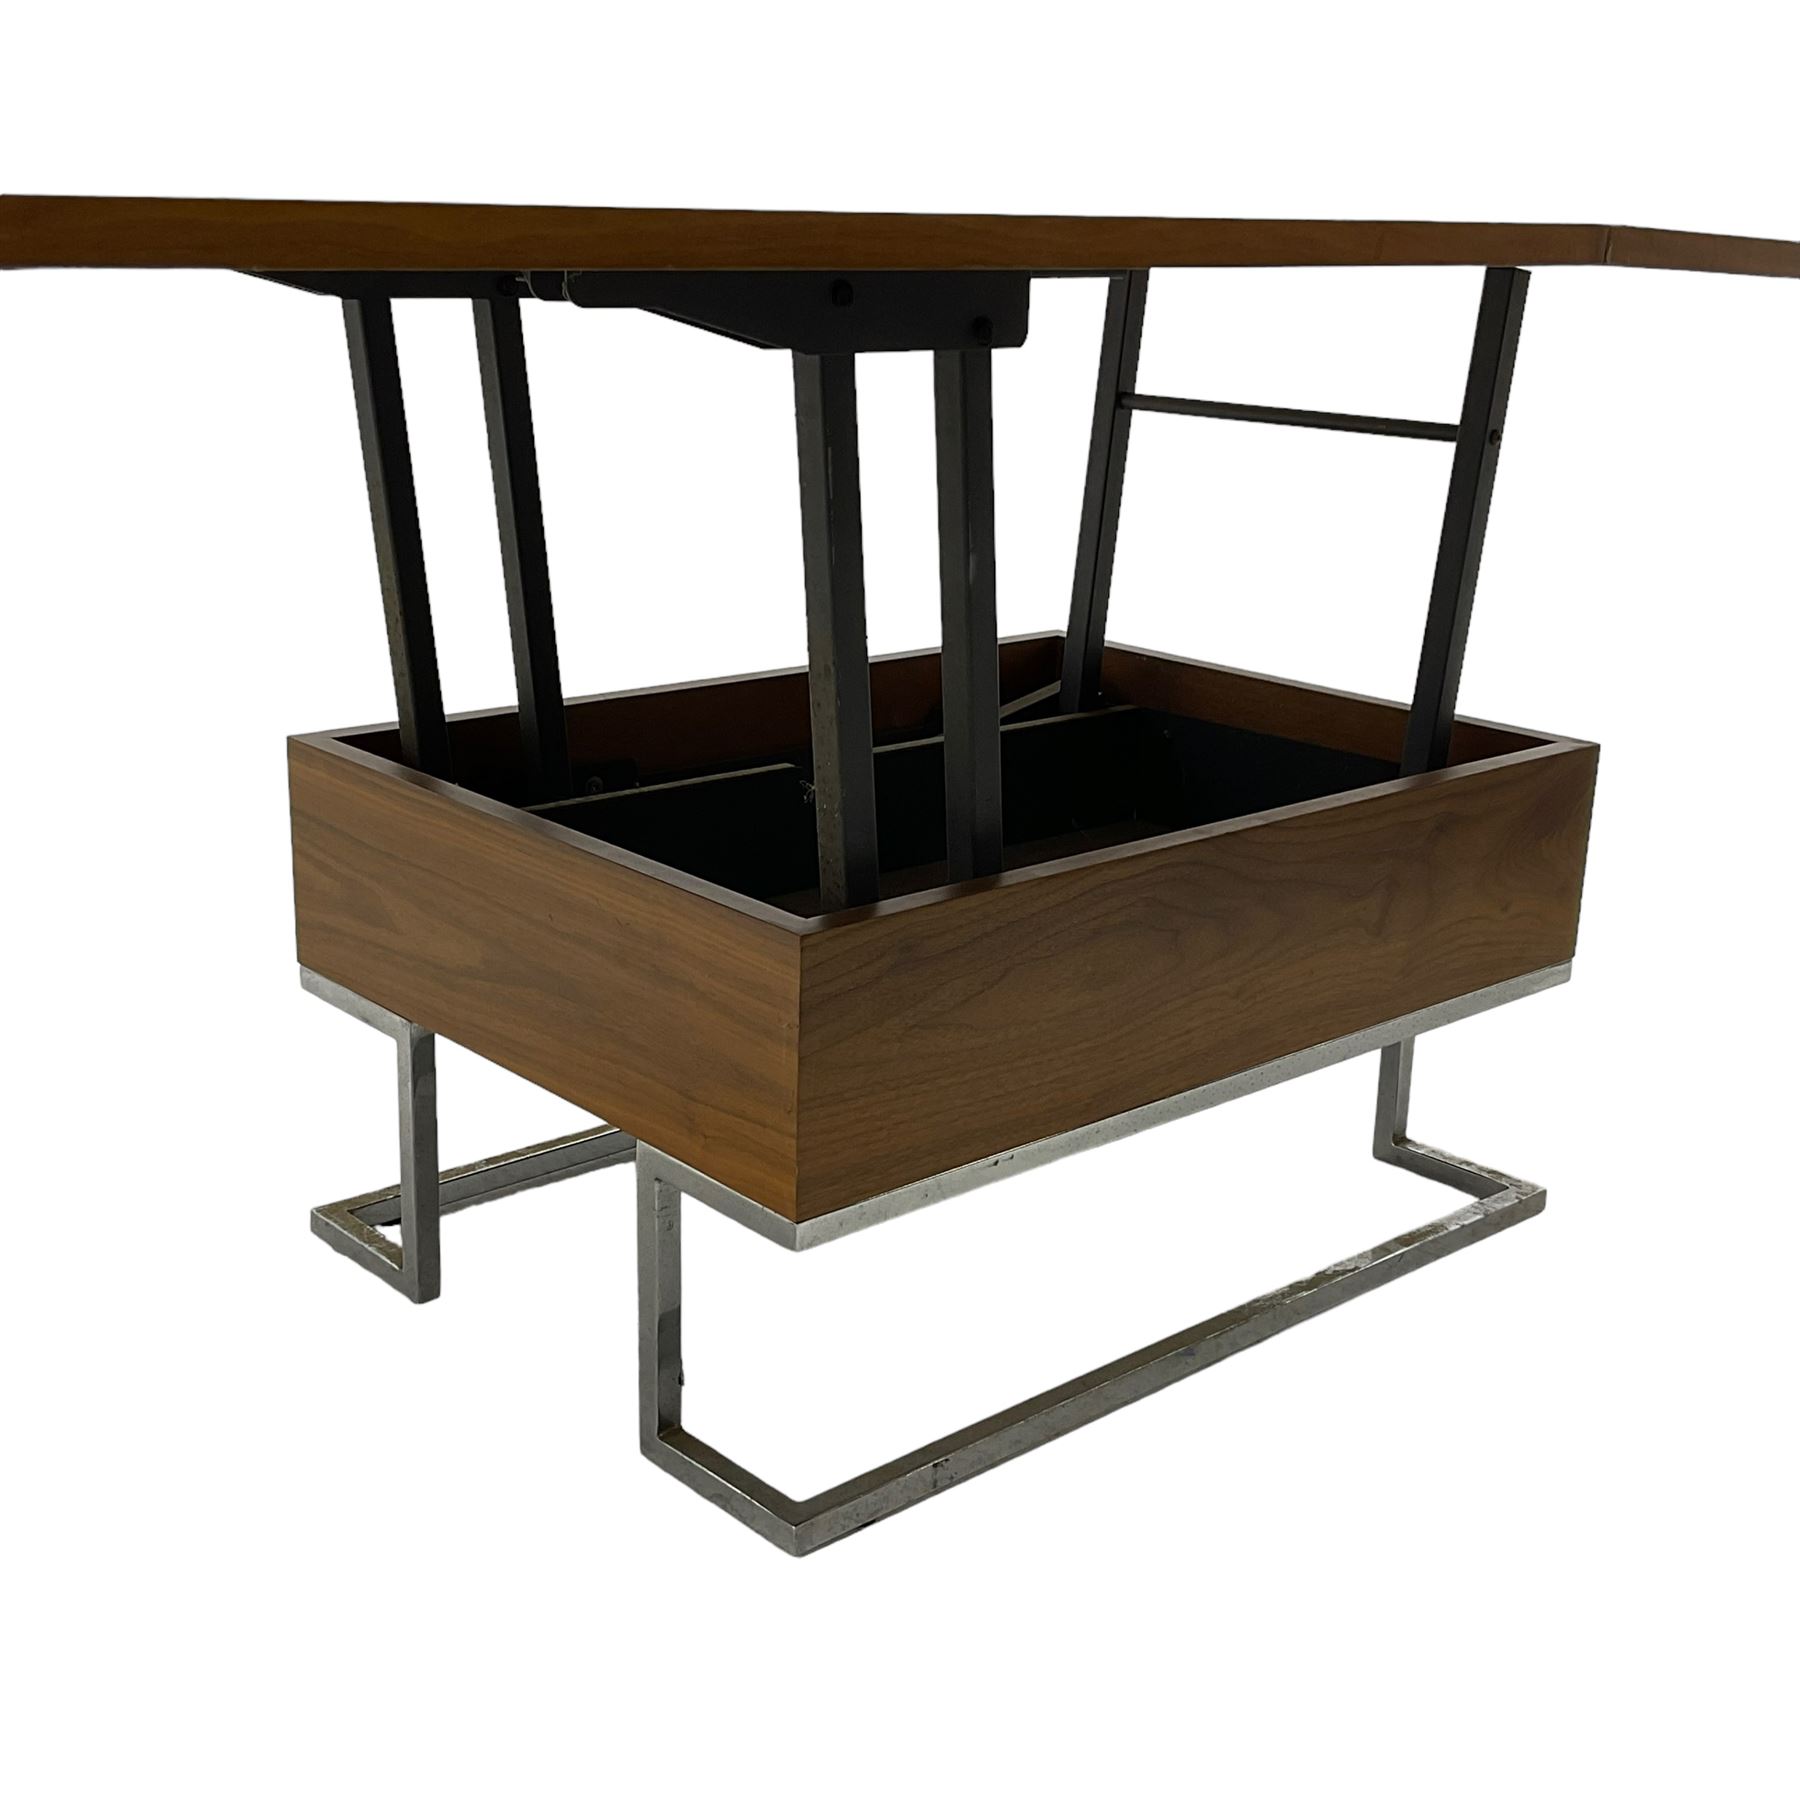 Contemporary walnut metamorphic coffee or dining table - Image 5 of 7